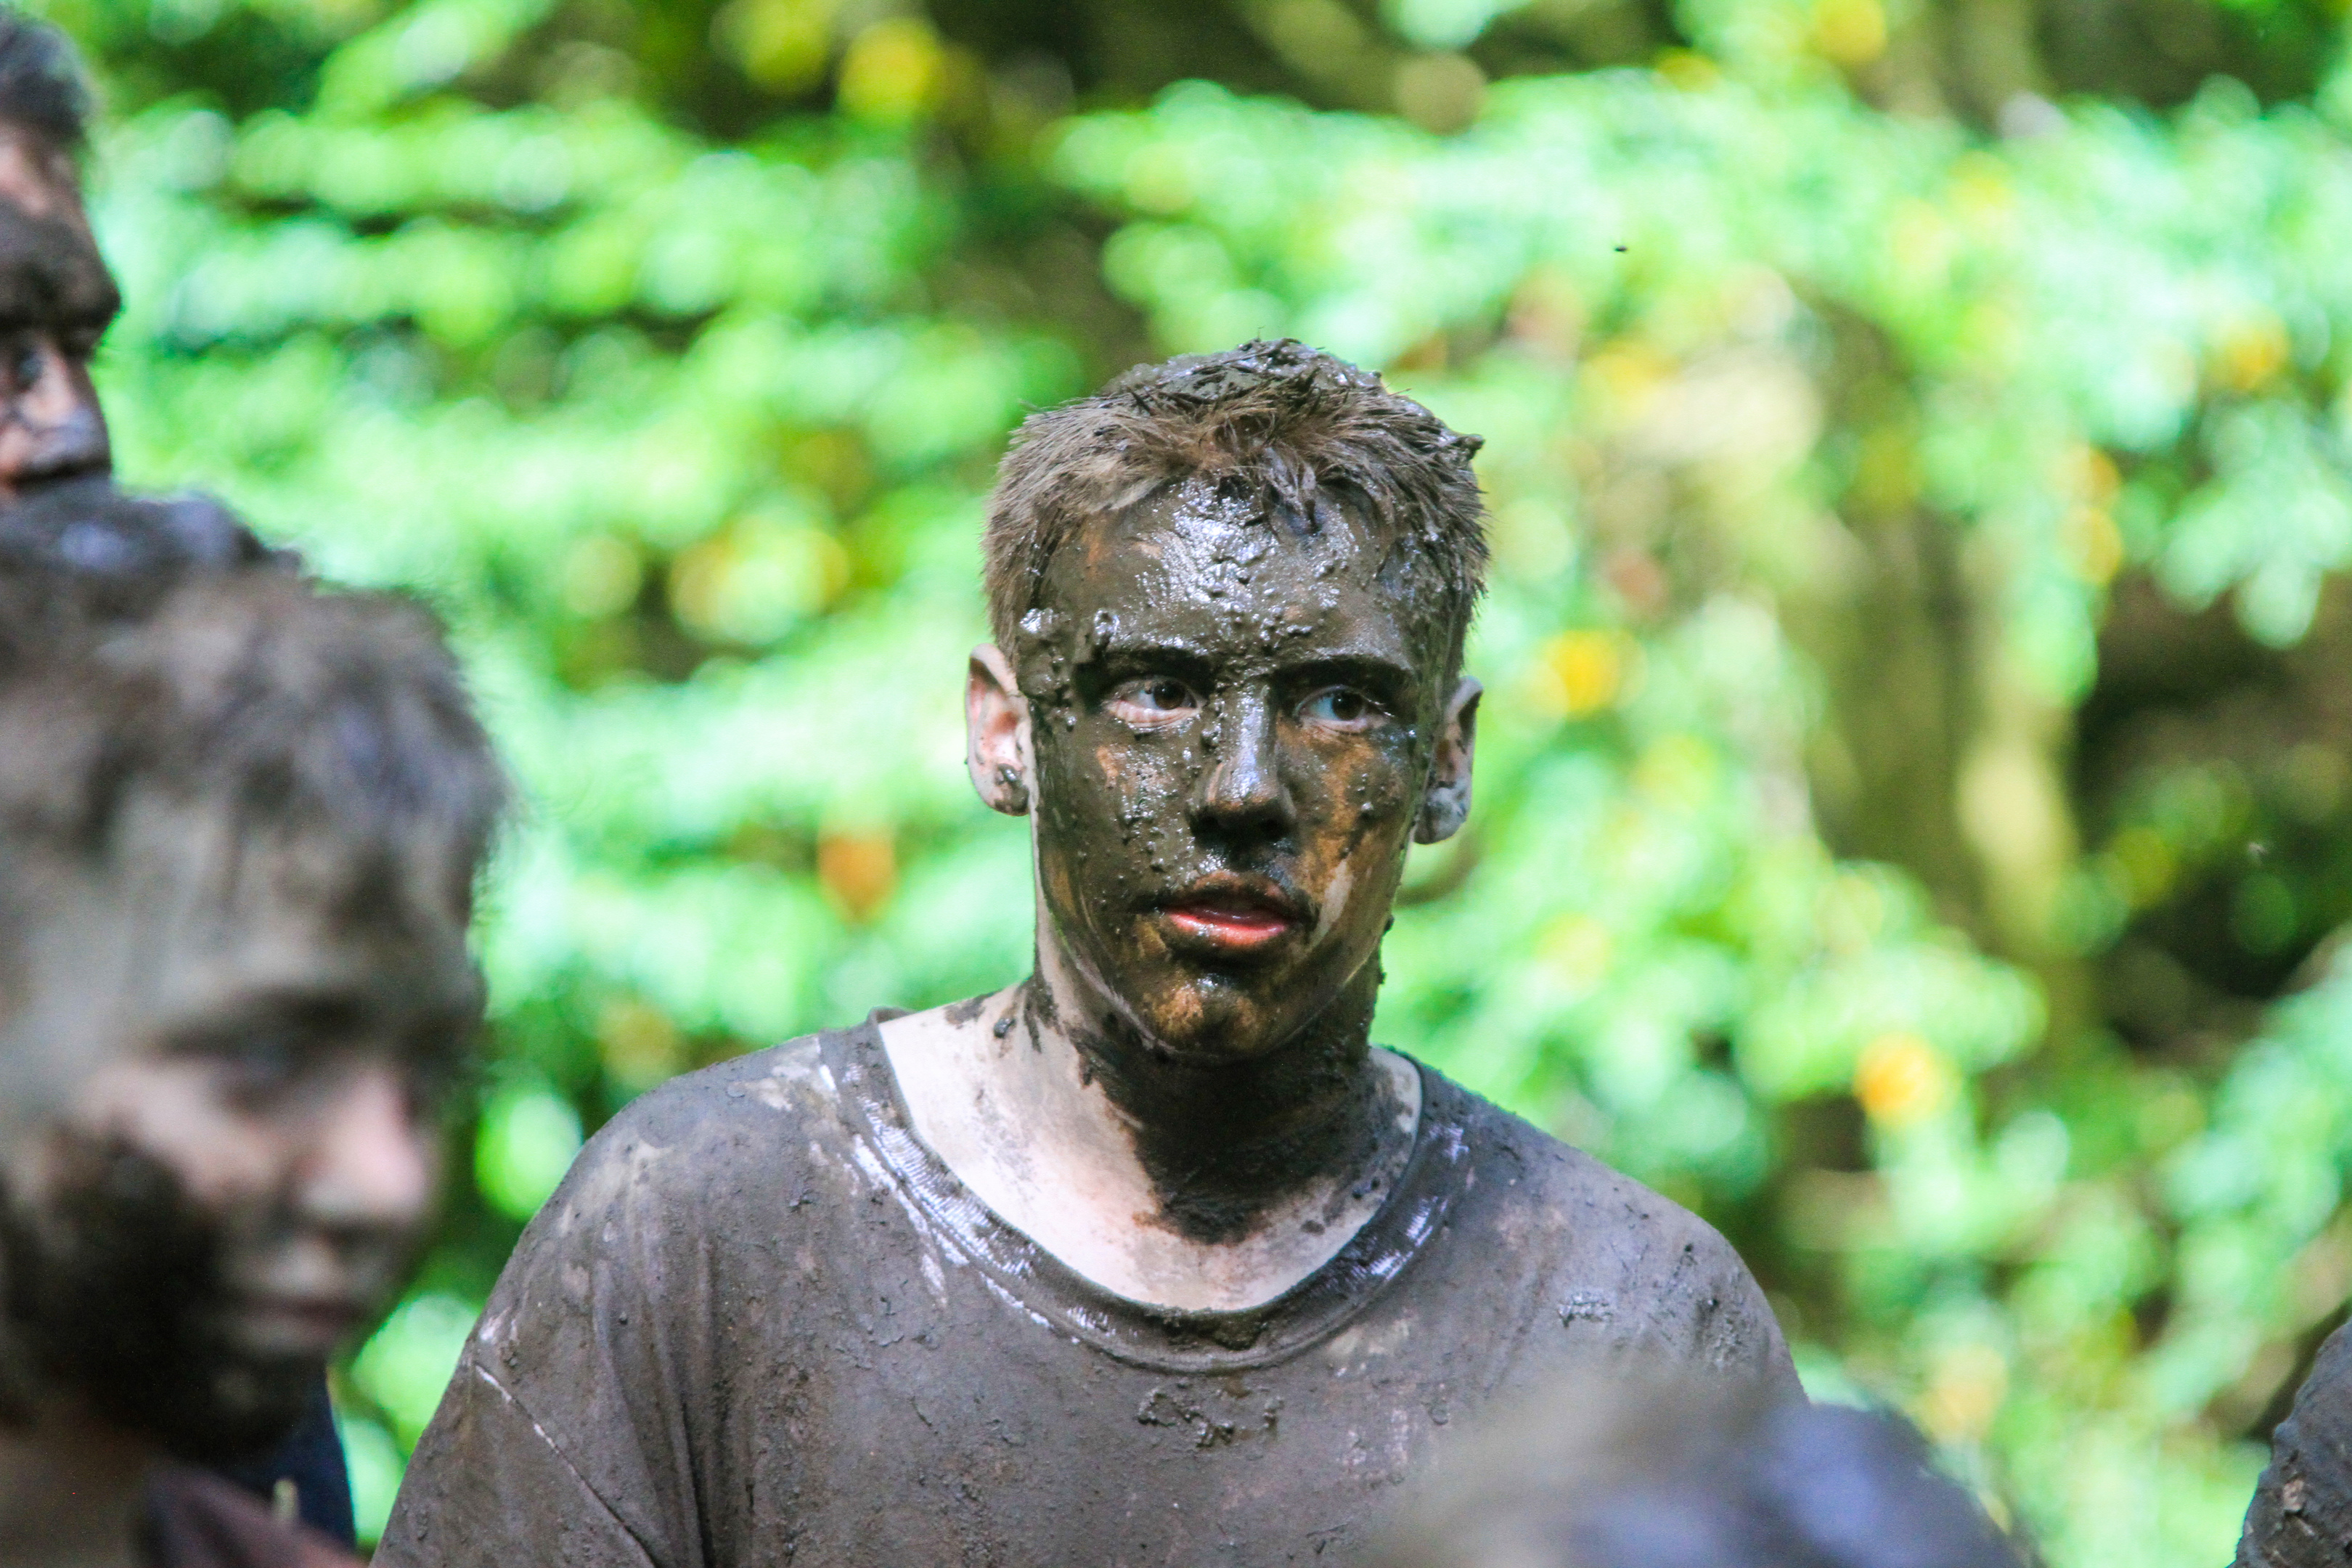 A Scout taking part in the mud ritual at the Blair Atholl Jamborette, an international scouting event.